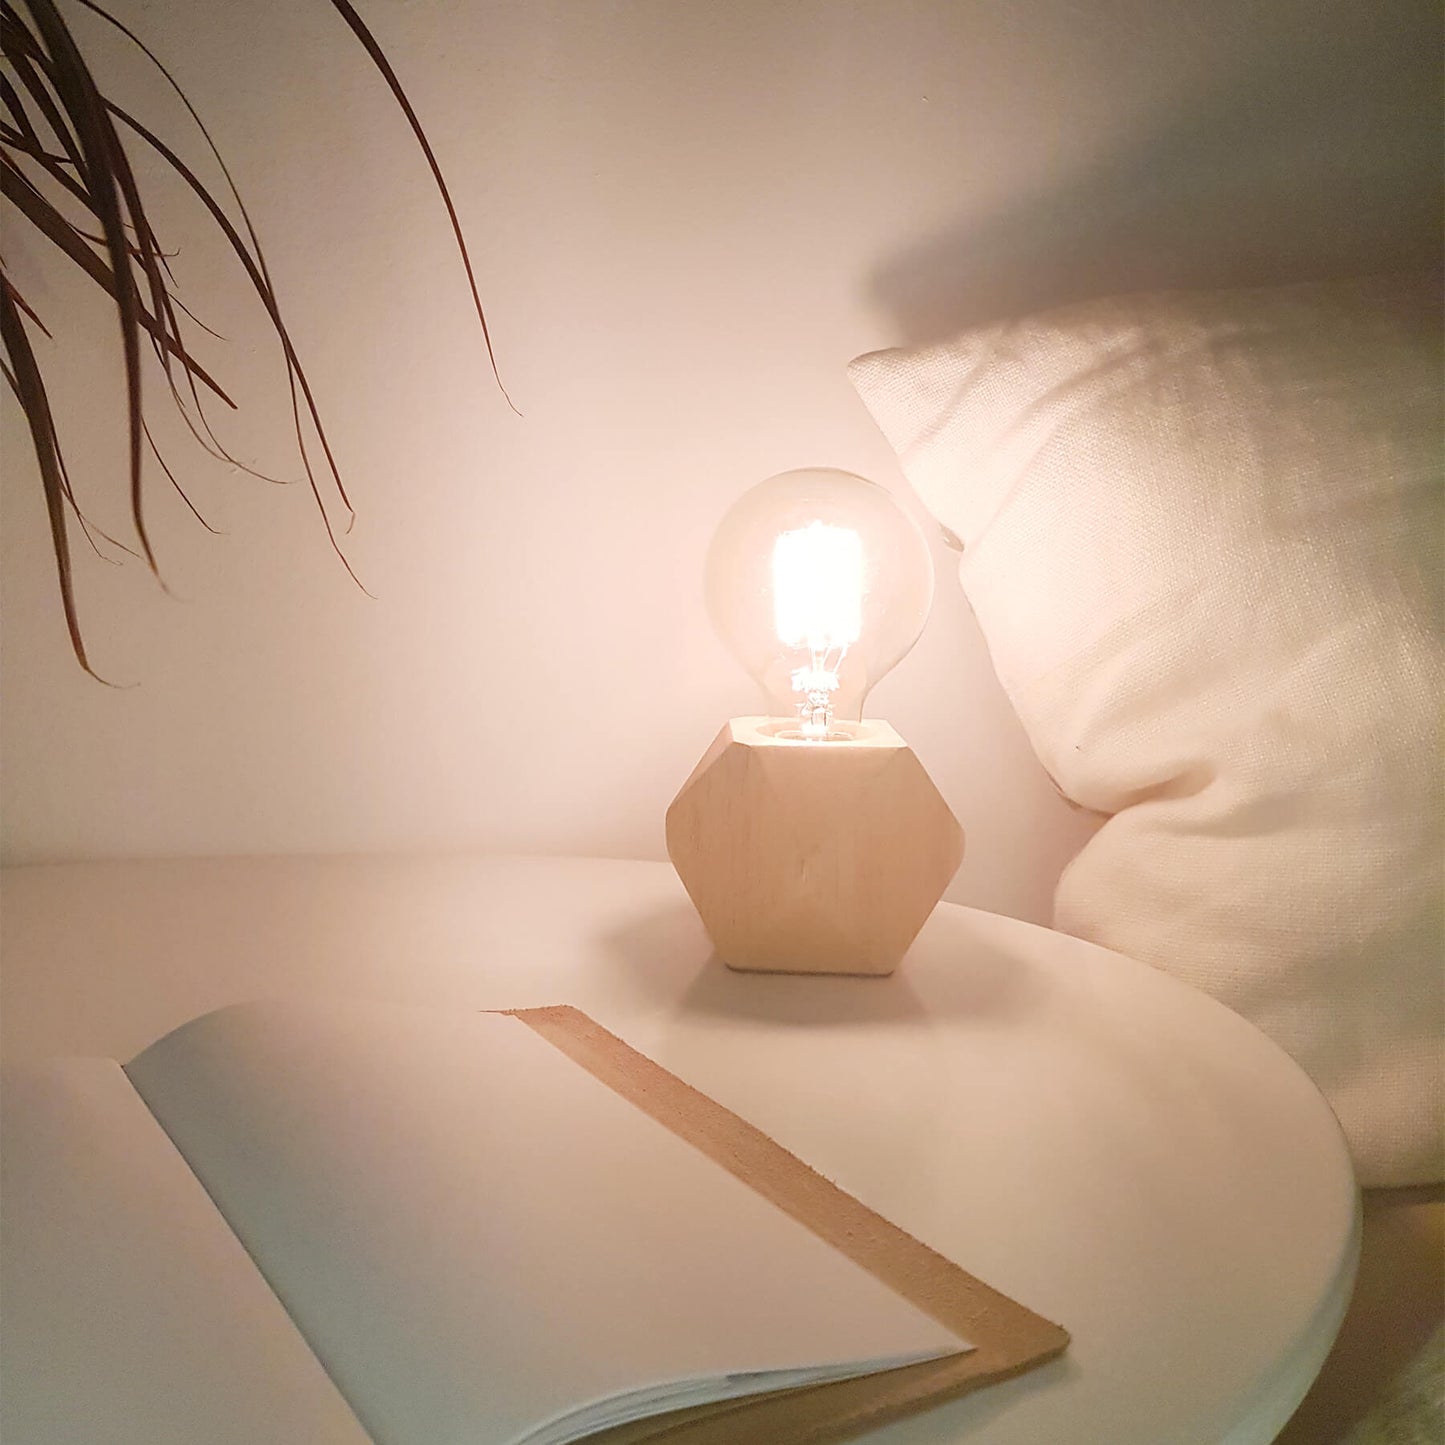 Bedside table lamp with light bulb. Wood with diamond base.